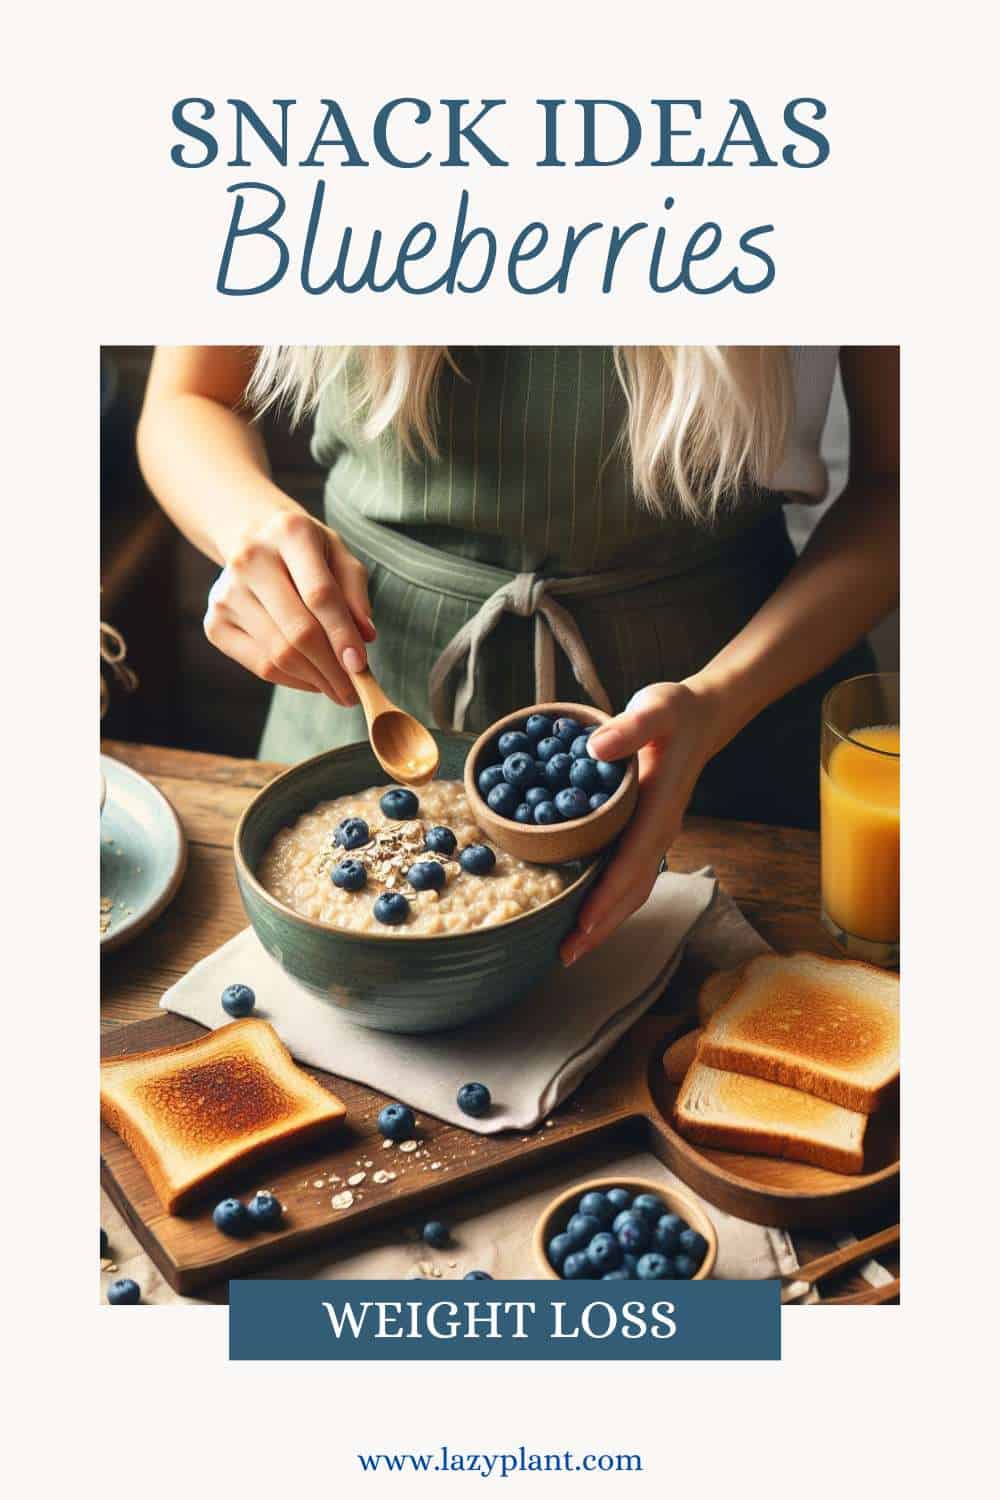 Why should I eat blueberries with overnight oats and protein-rich foods at breakfast for Weight Loss?